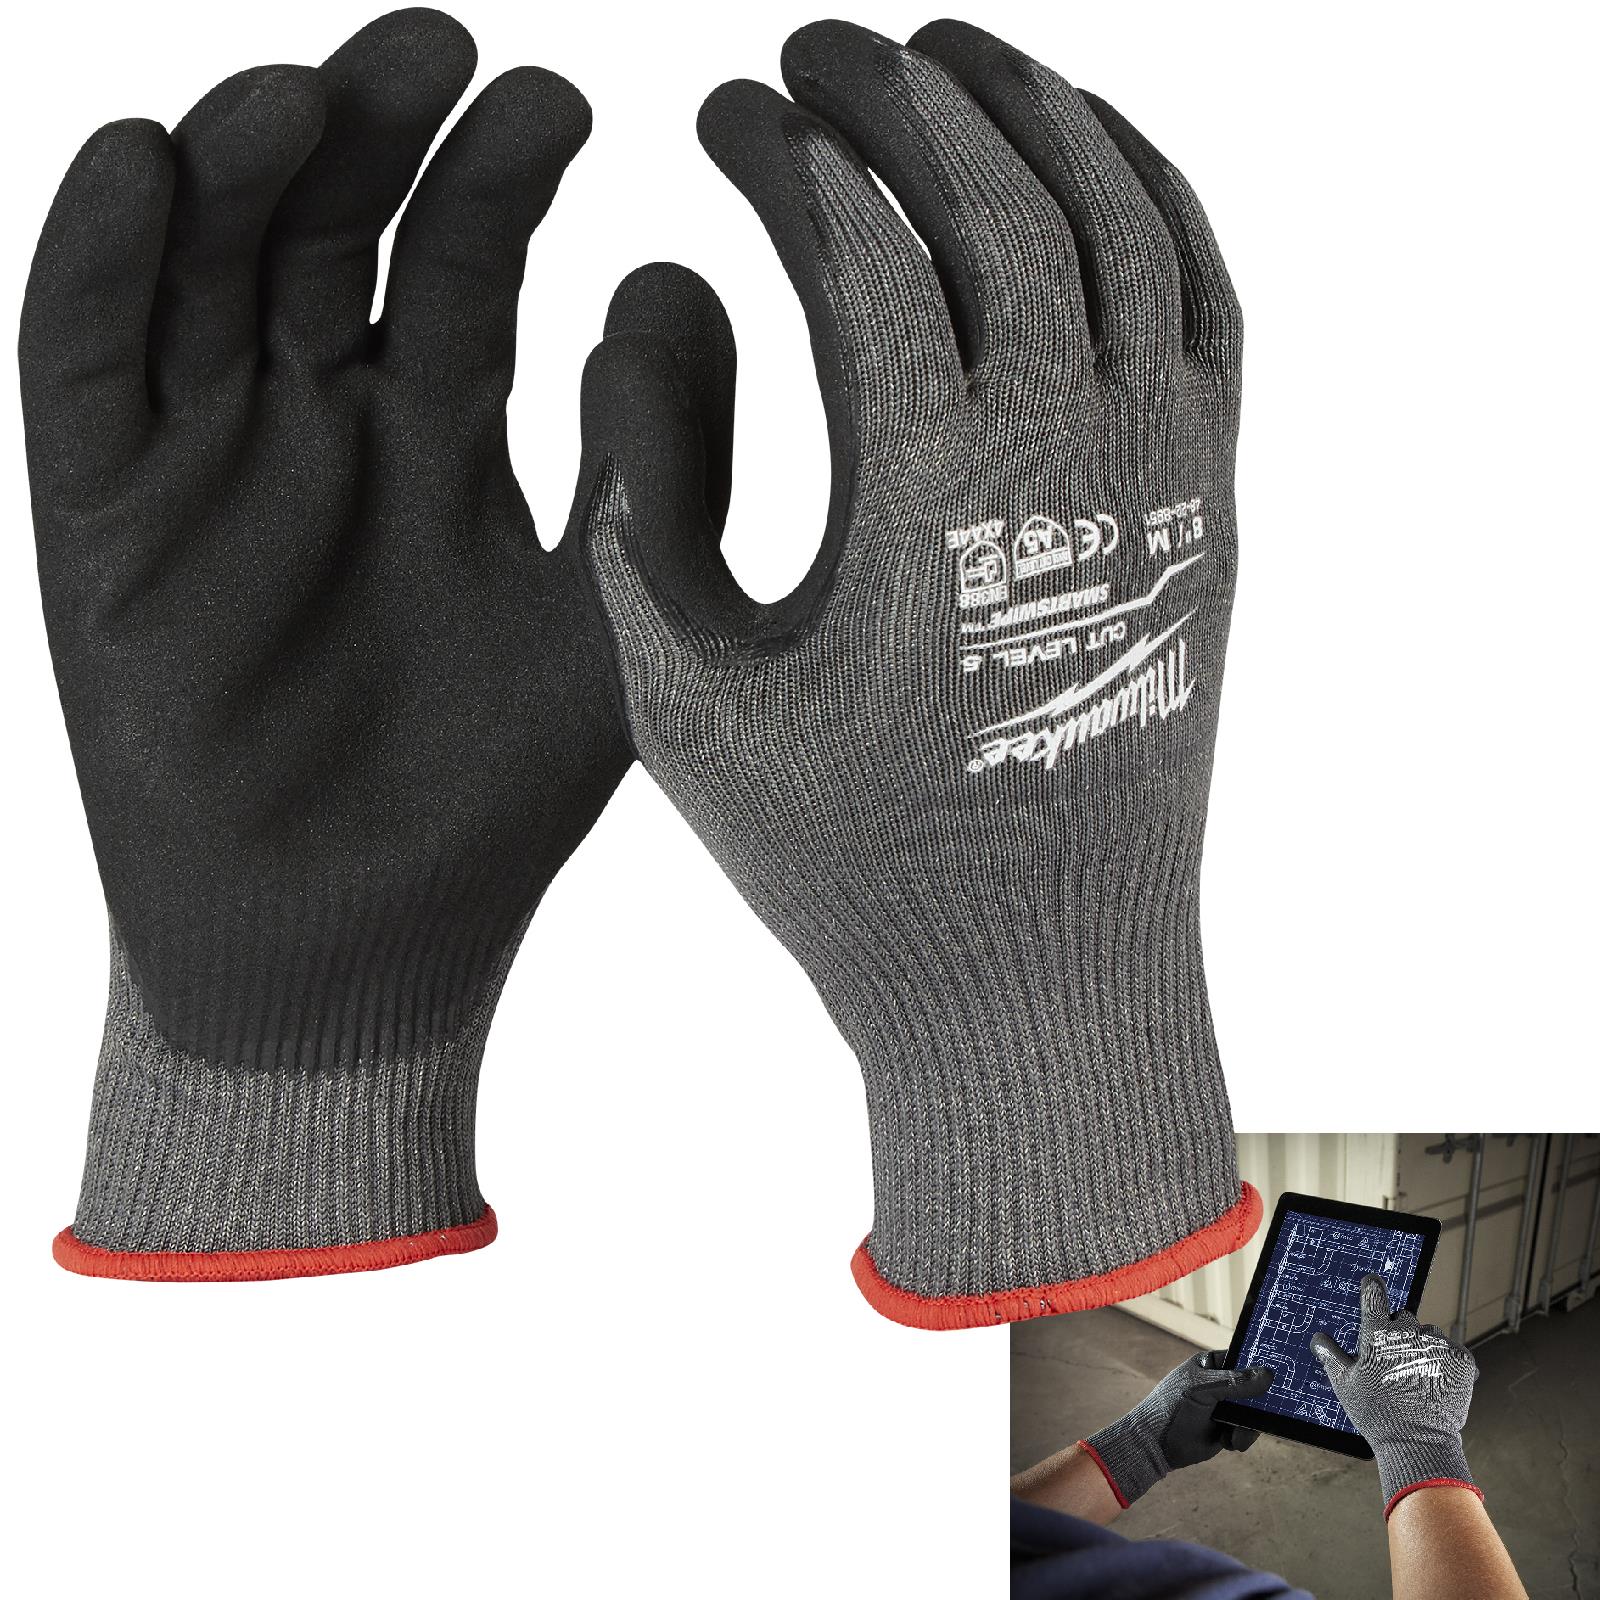 Milwaukee Safety Gloves Cut Level 5/E Dipped Glove Size 9 / L Large